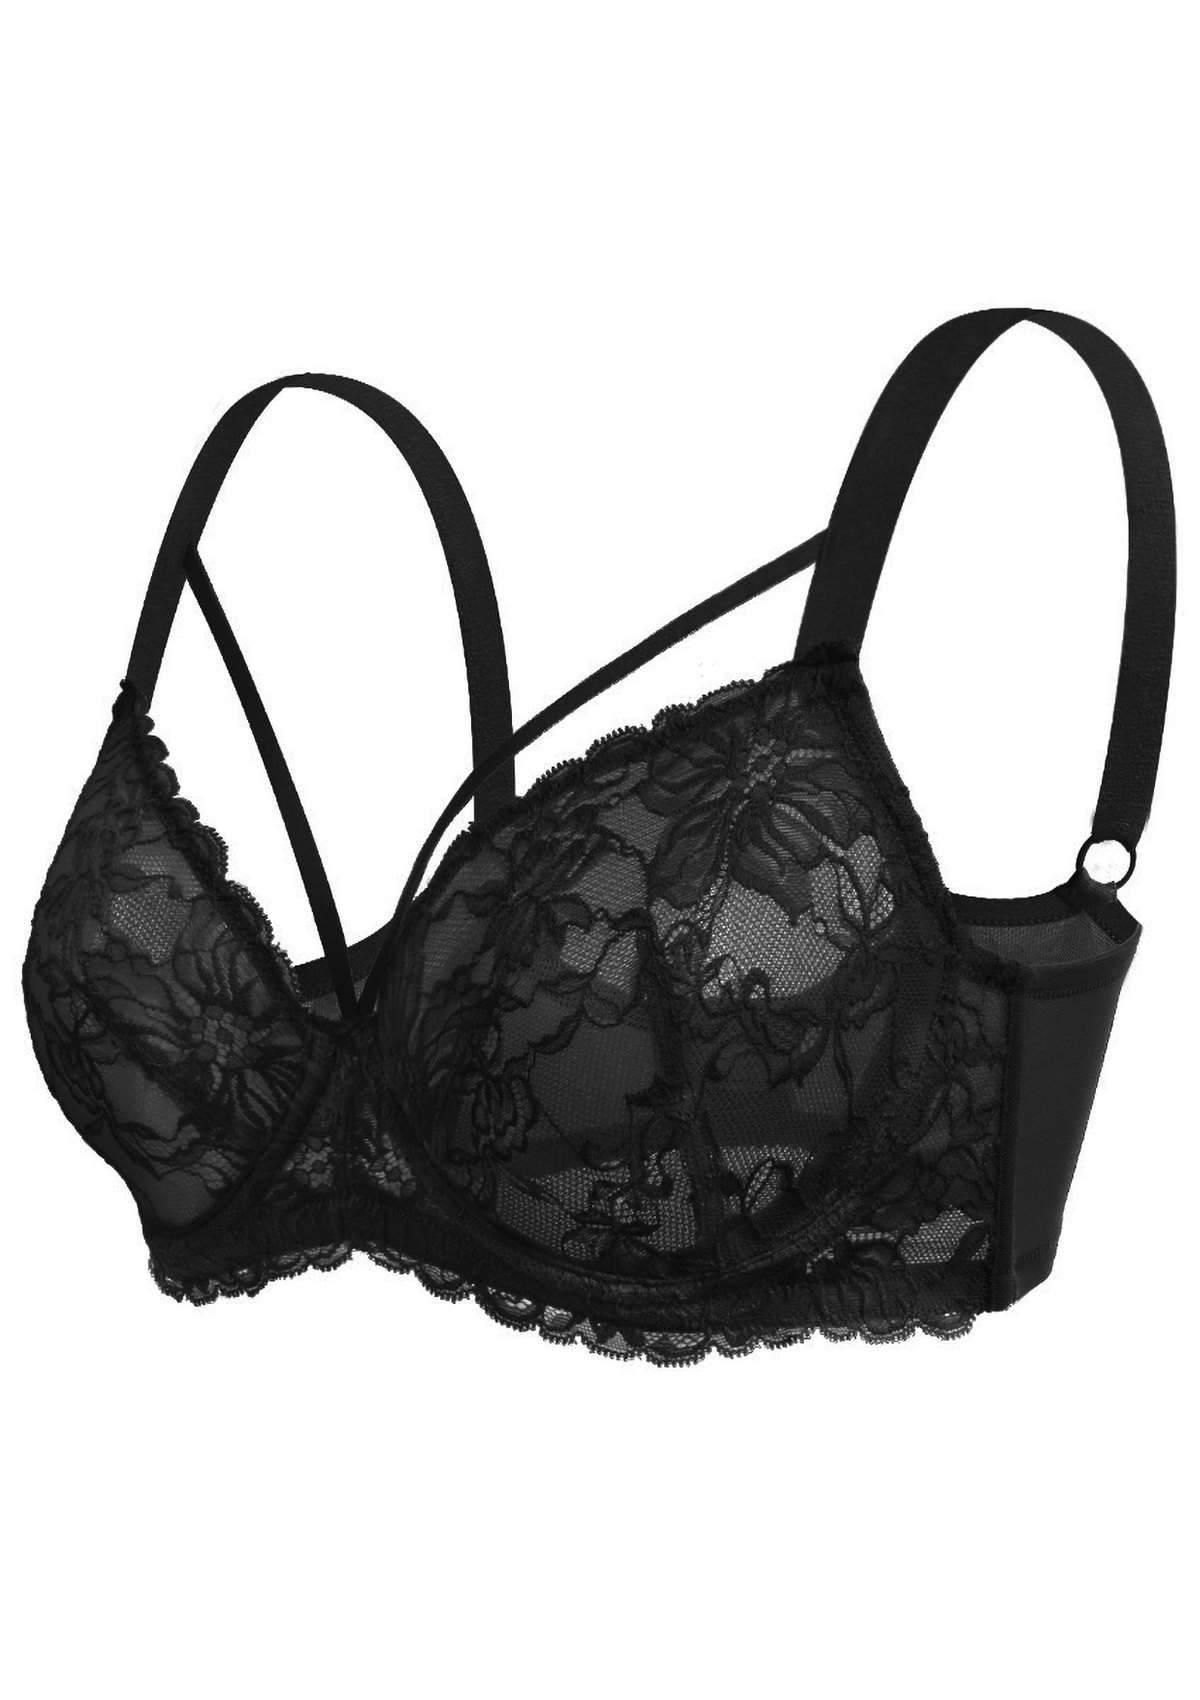 HSIA Pretty In Petals Bra - Plus Size Lingerie For Comfrot And Support - Black / 42 / I